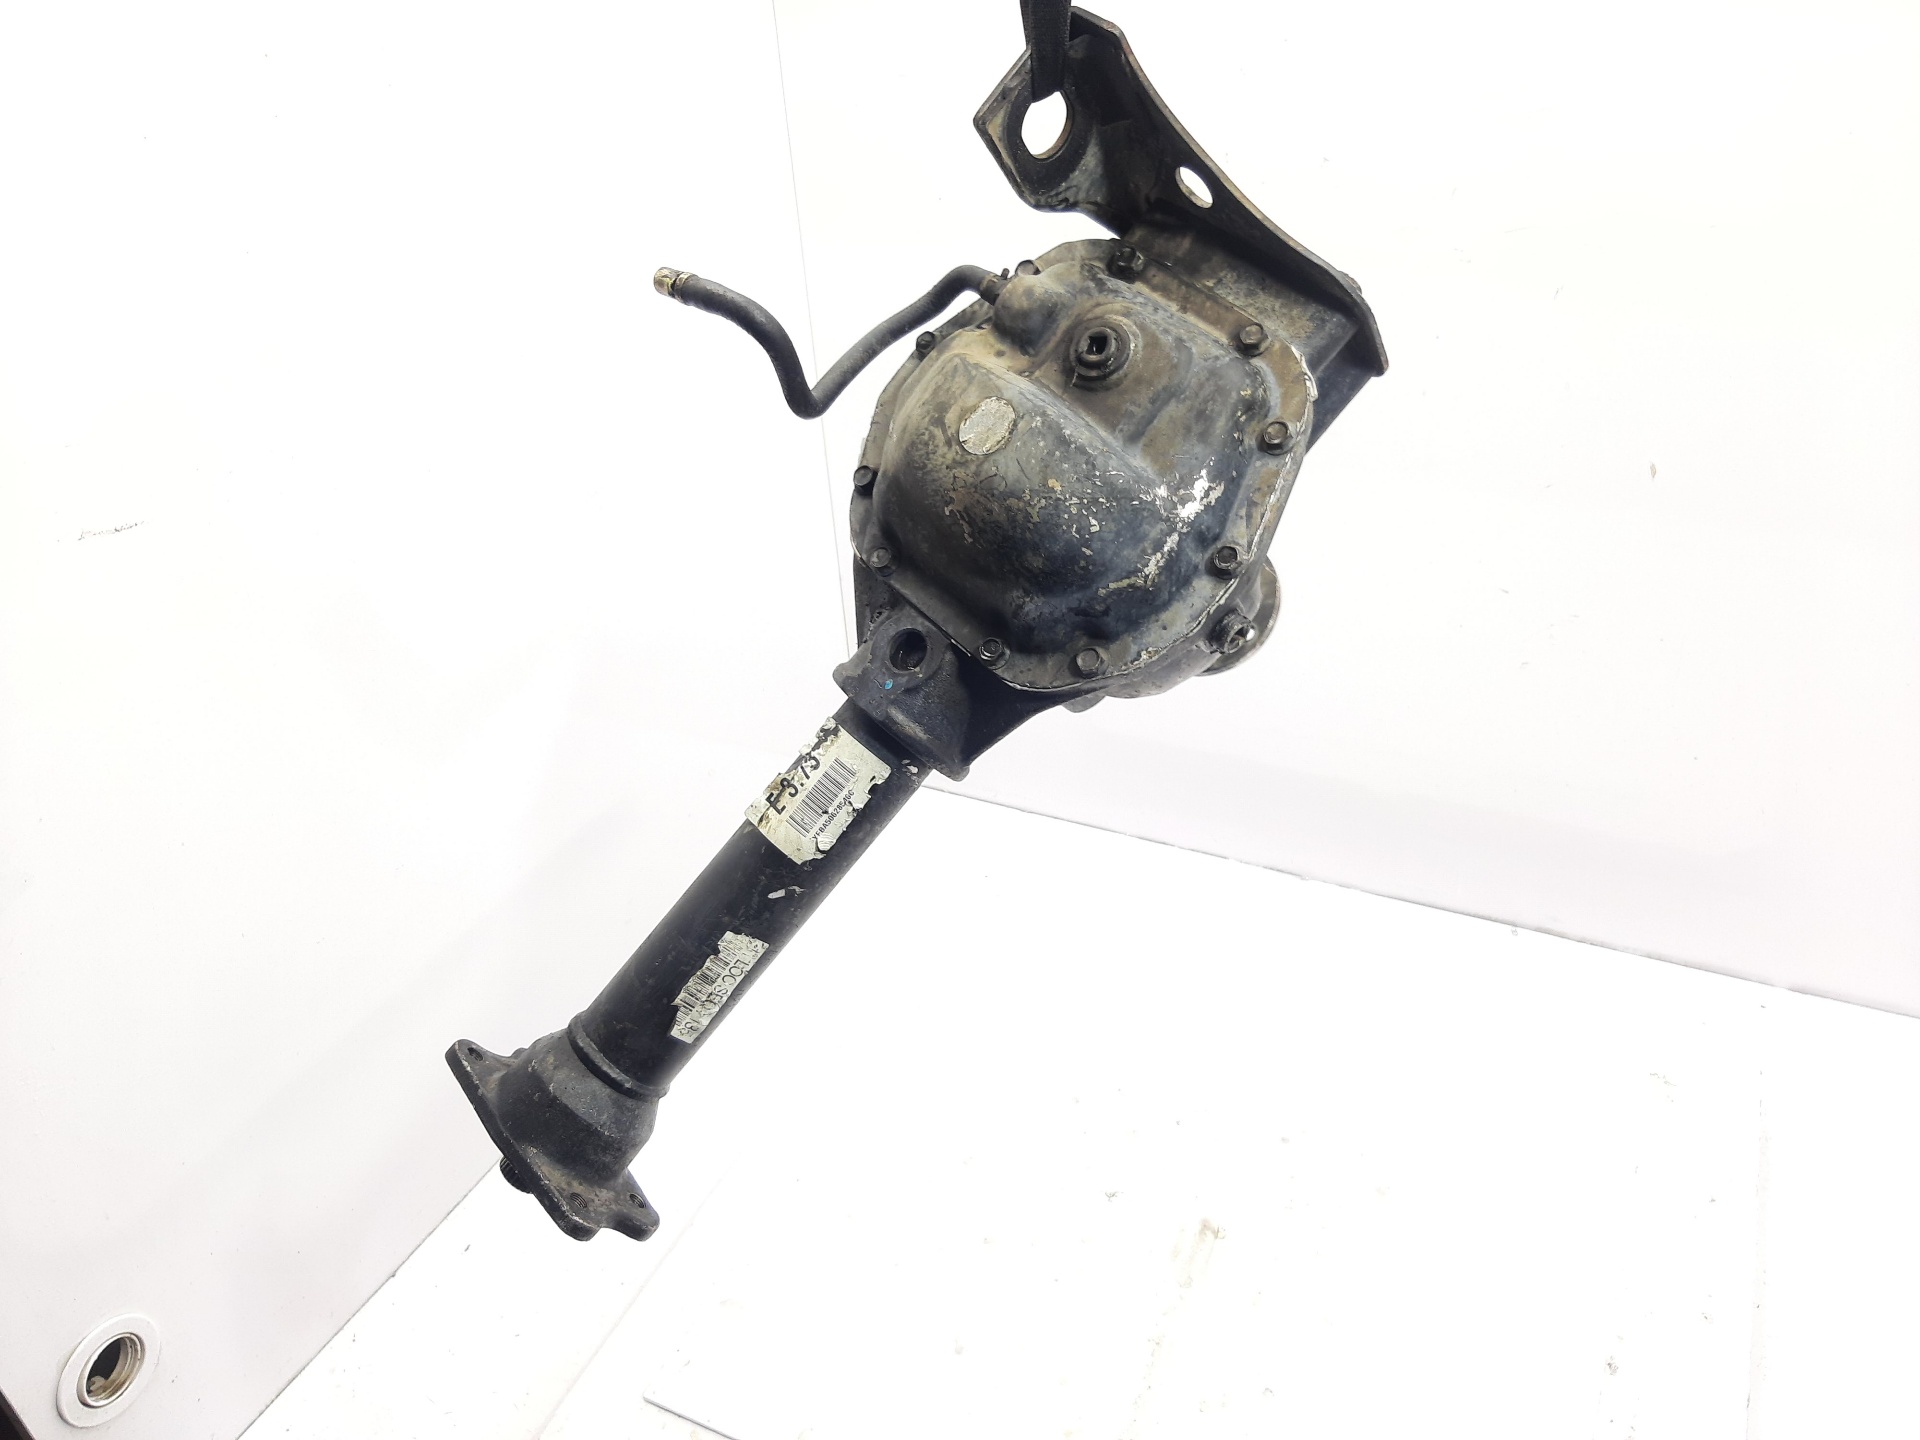 SSANGYONG Rexton Y200 (2001-2007) Front Transfer Case YFBA50628546C 24152108